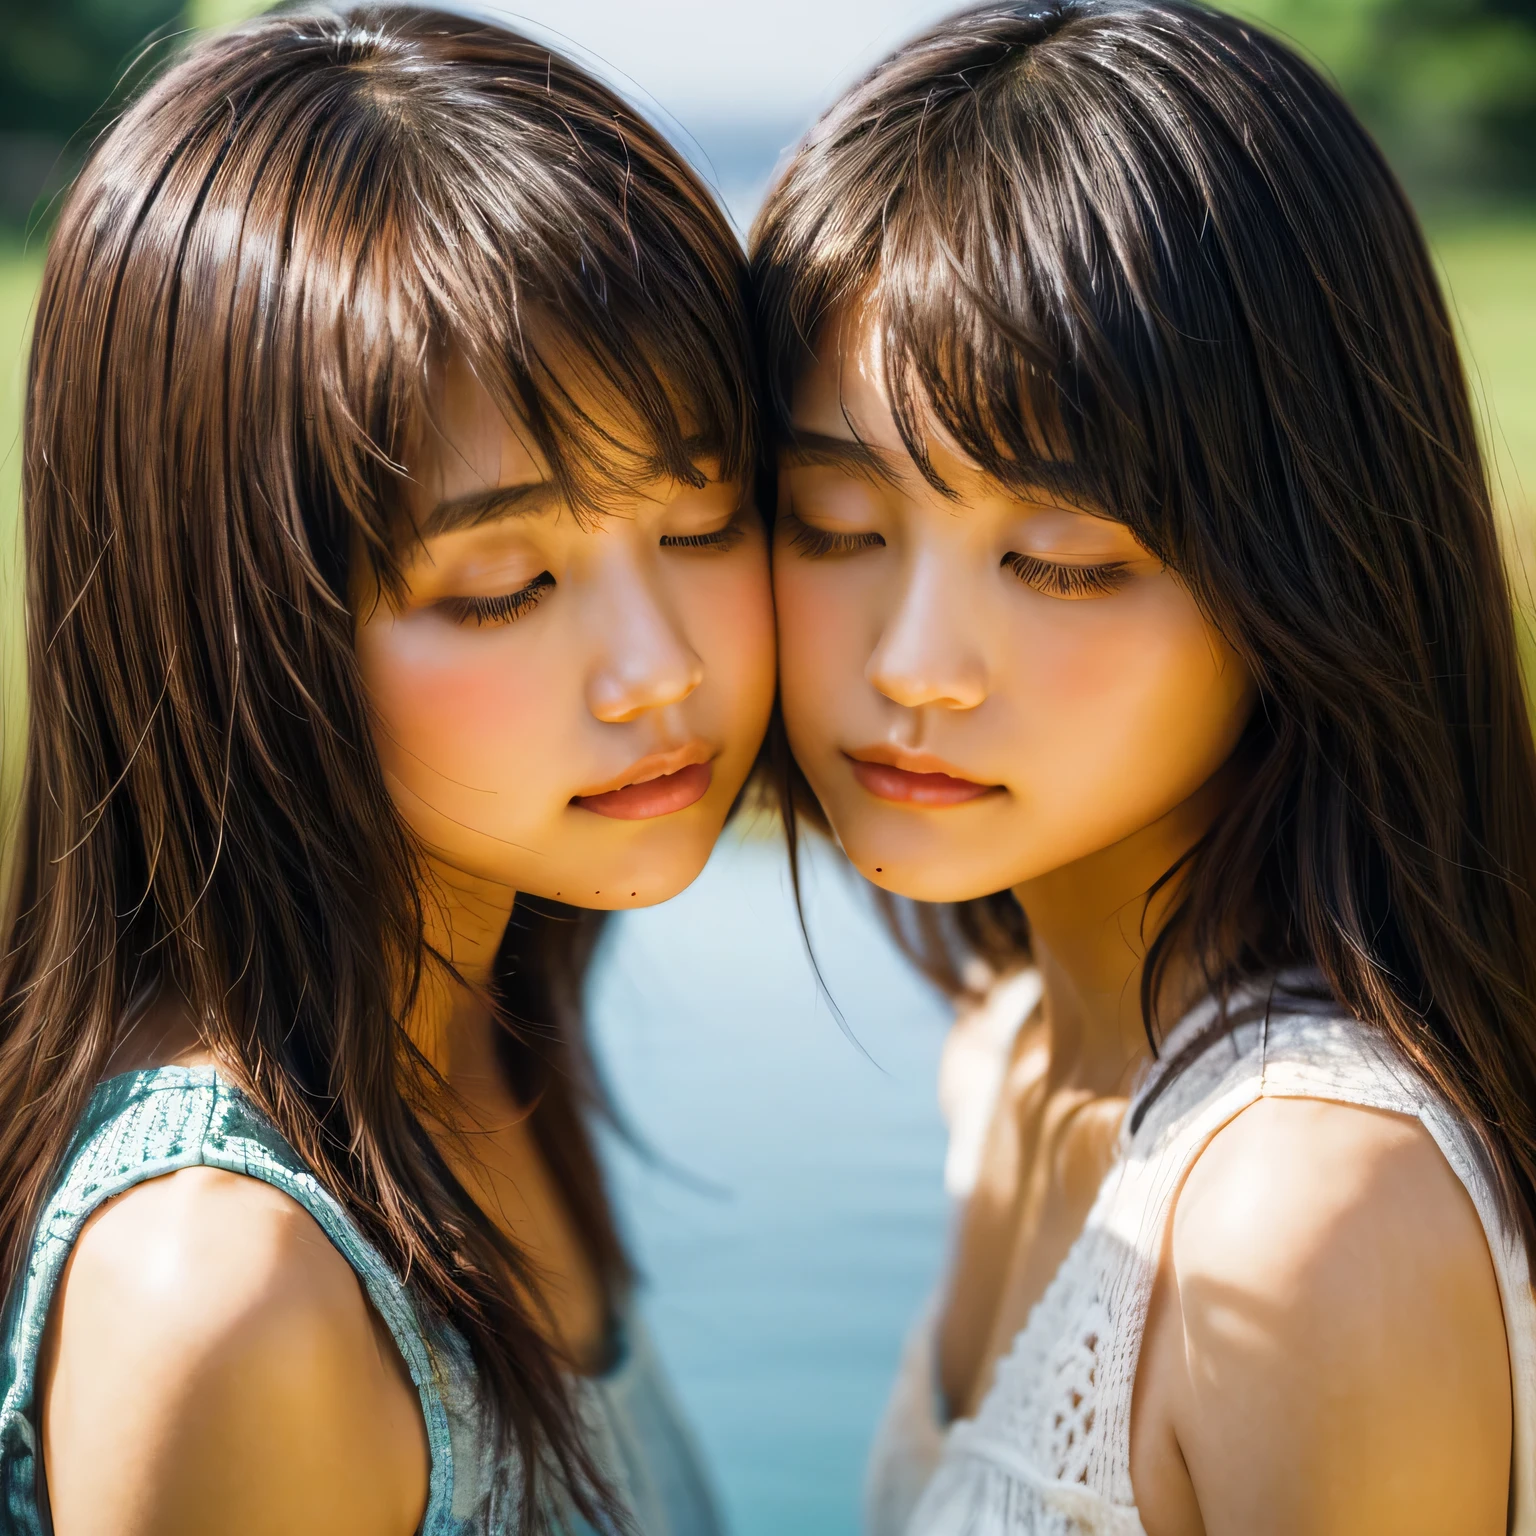 identical twin sisters、close your eyes、I'm about to kiss, 16 years old, bangs